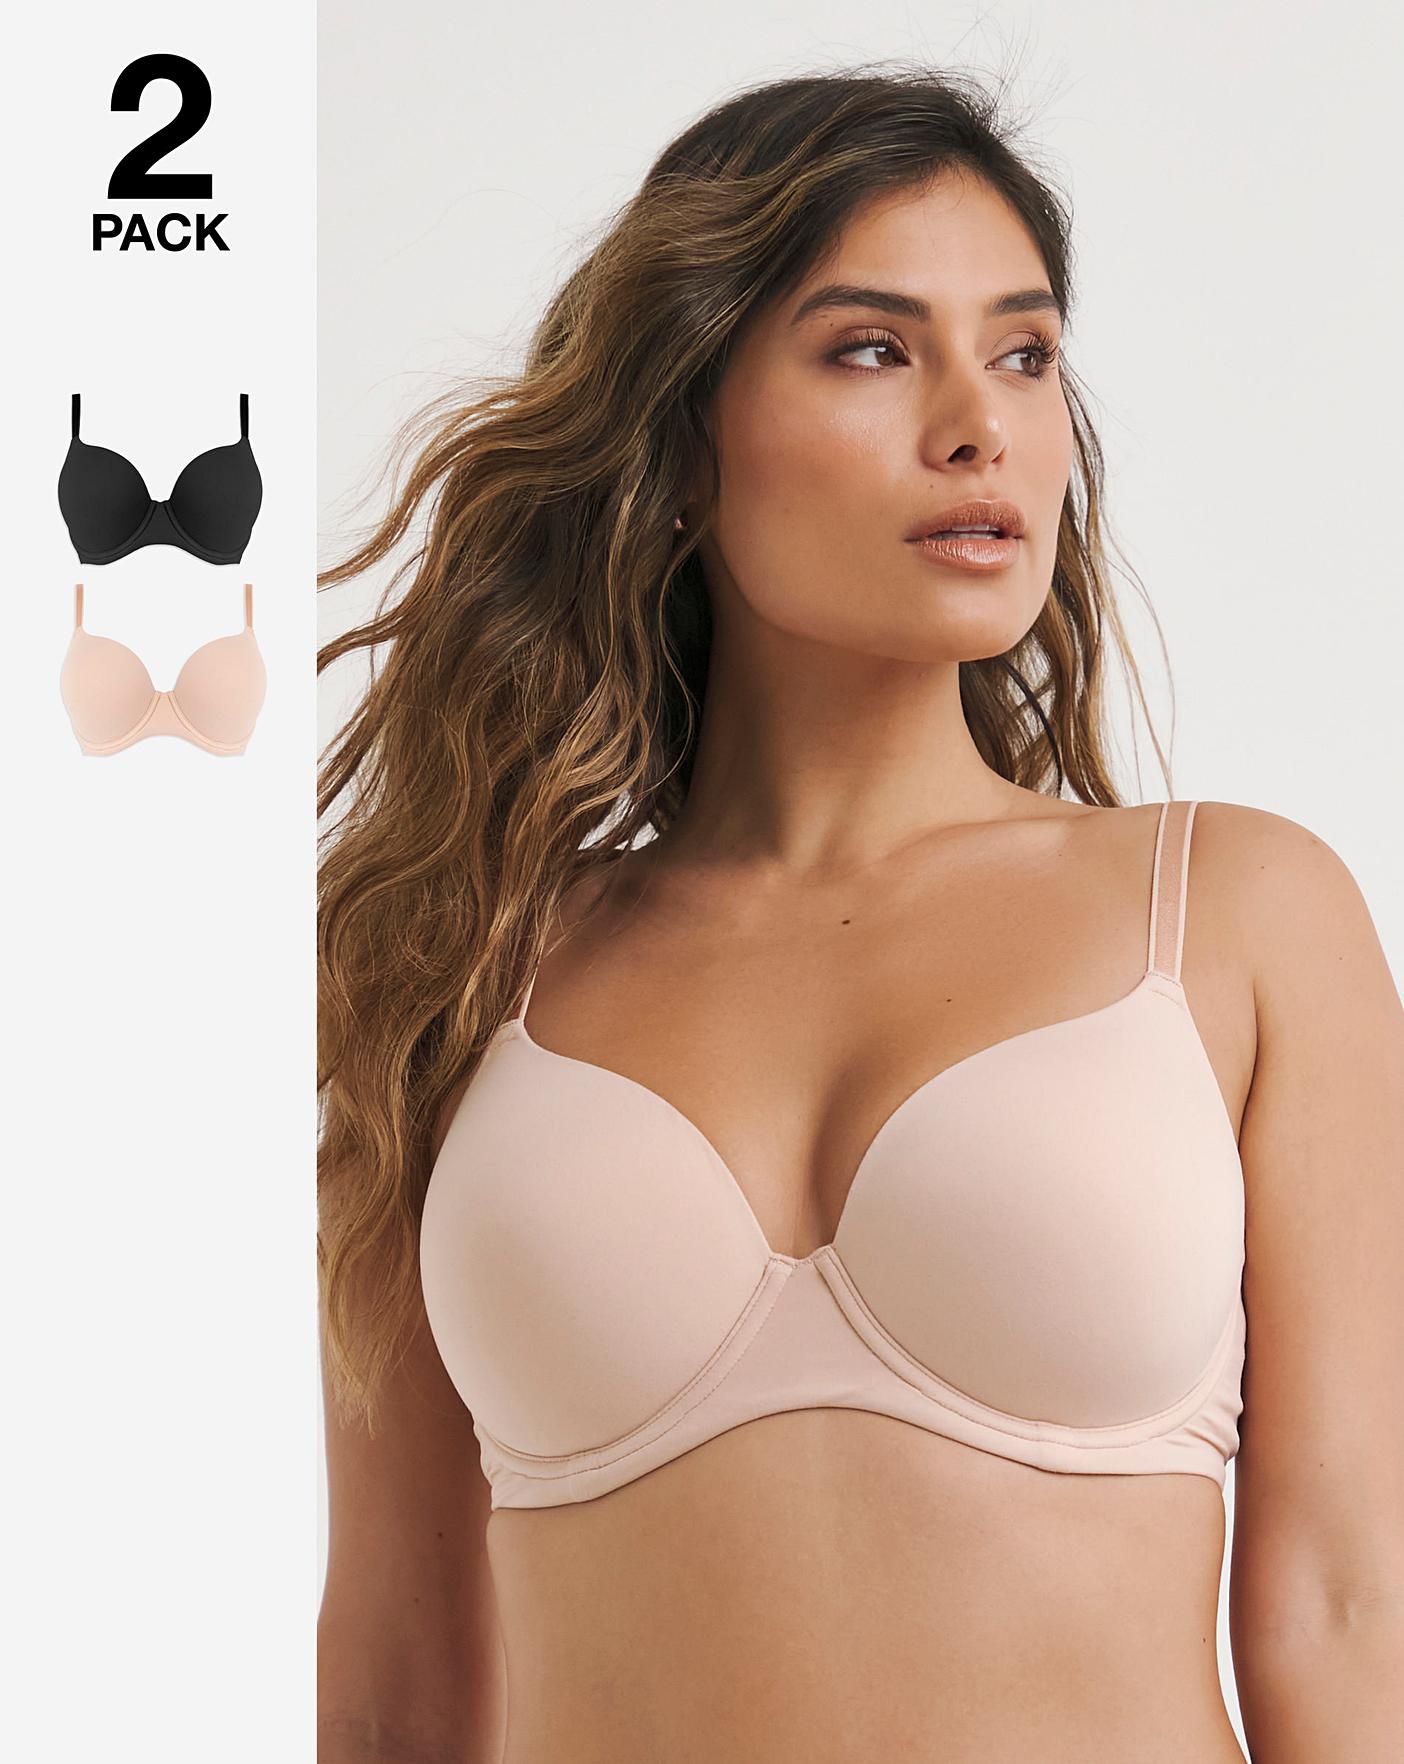 bra size  Look Fabulous For Less!